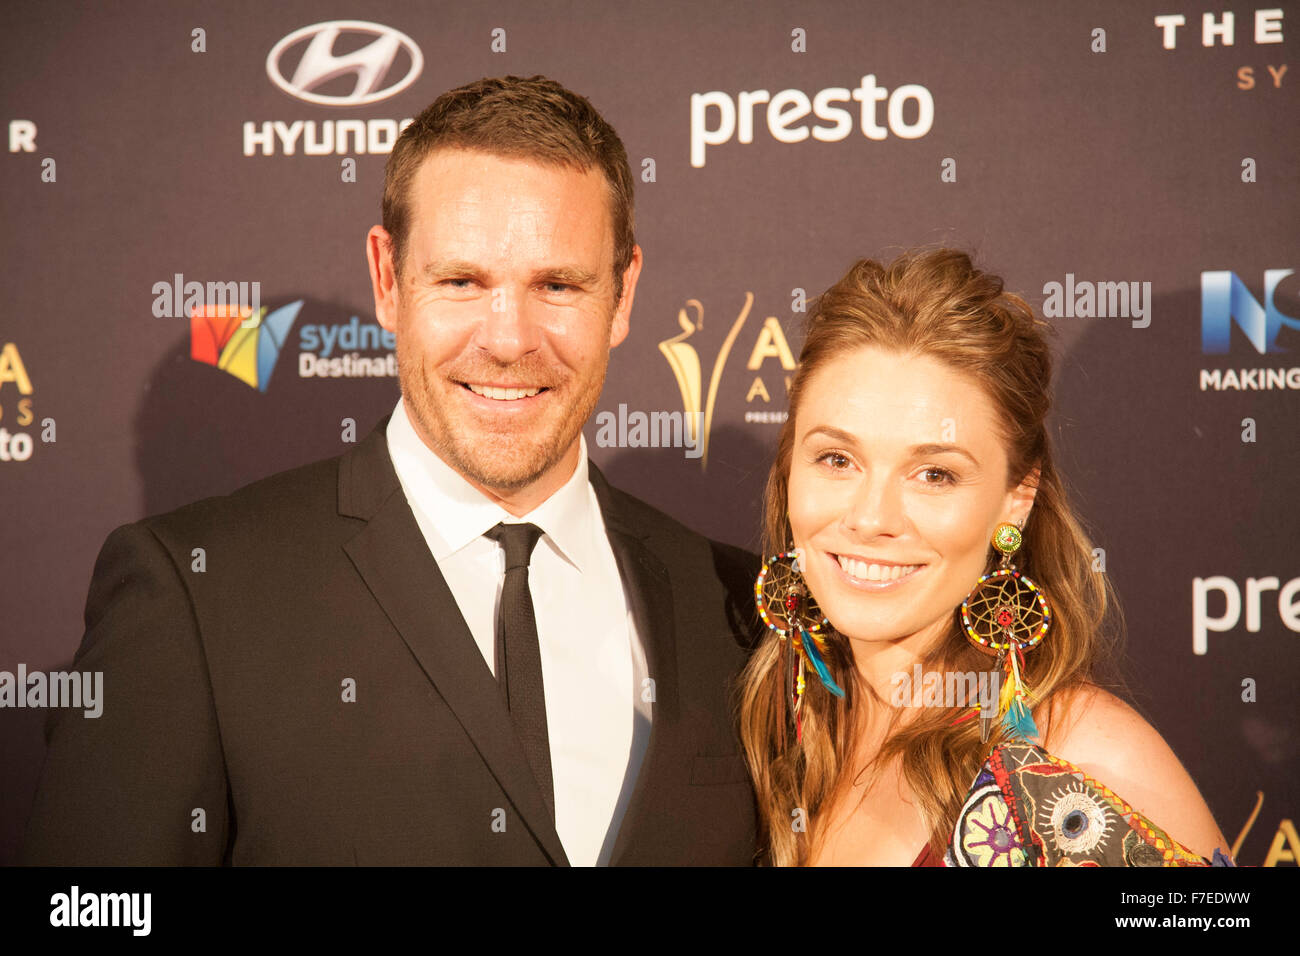 Sydney, Australia. 30th Nov, 2015. Aaron Jeffrey and Zoe Naylor arrive on the red carpet ahead of the 5th AACTA Awards Industry Dinner. The Australian Academy of Cinema and Television Arts Awards recognise screen excellence in Australia. Credit:  model10/Alamy Live News Stock Photo